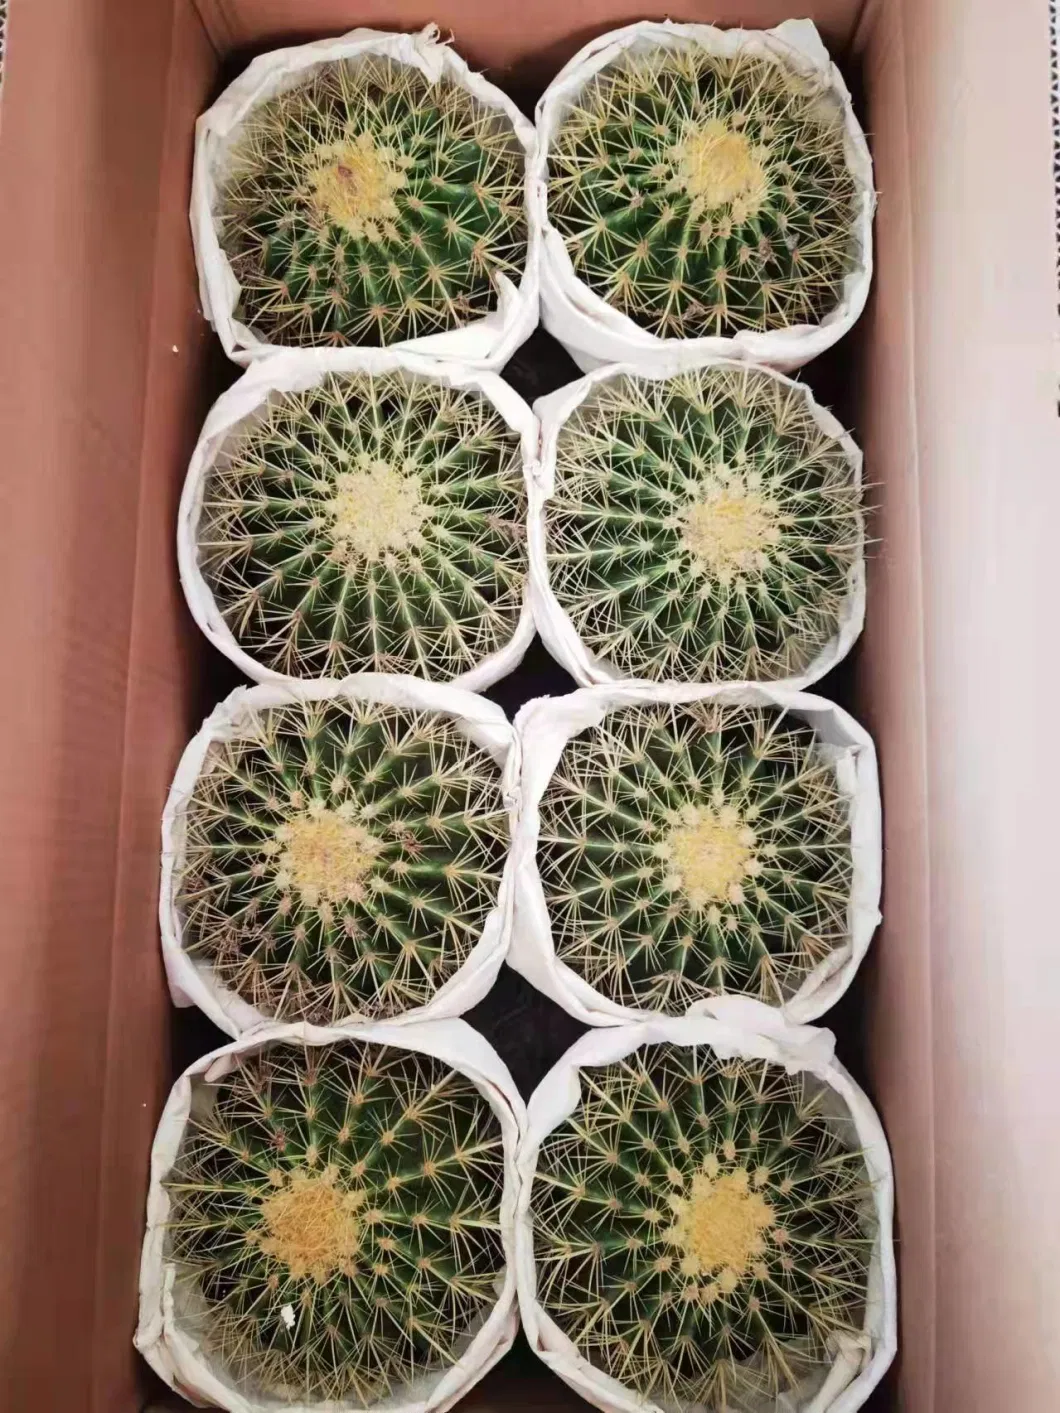 Small Size Cactus Ball Plant Mammillaria Hahniana in Stock, Best Gift